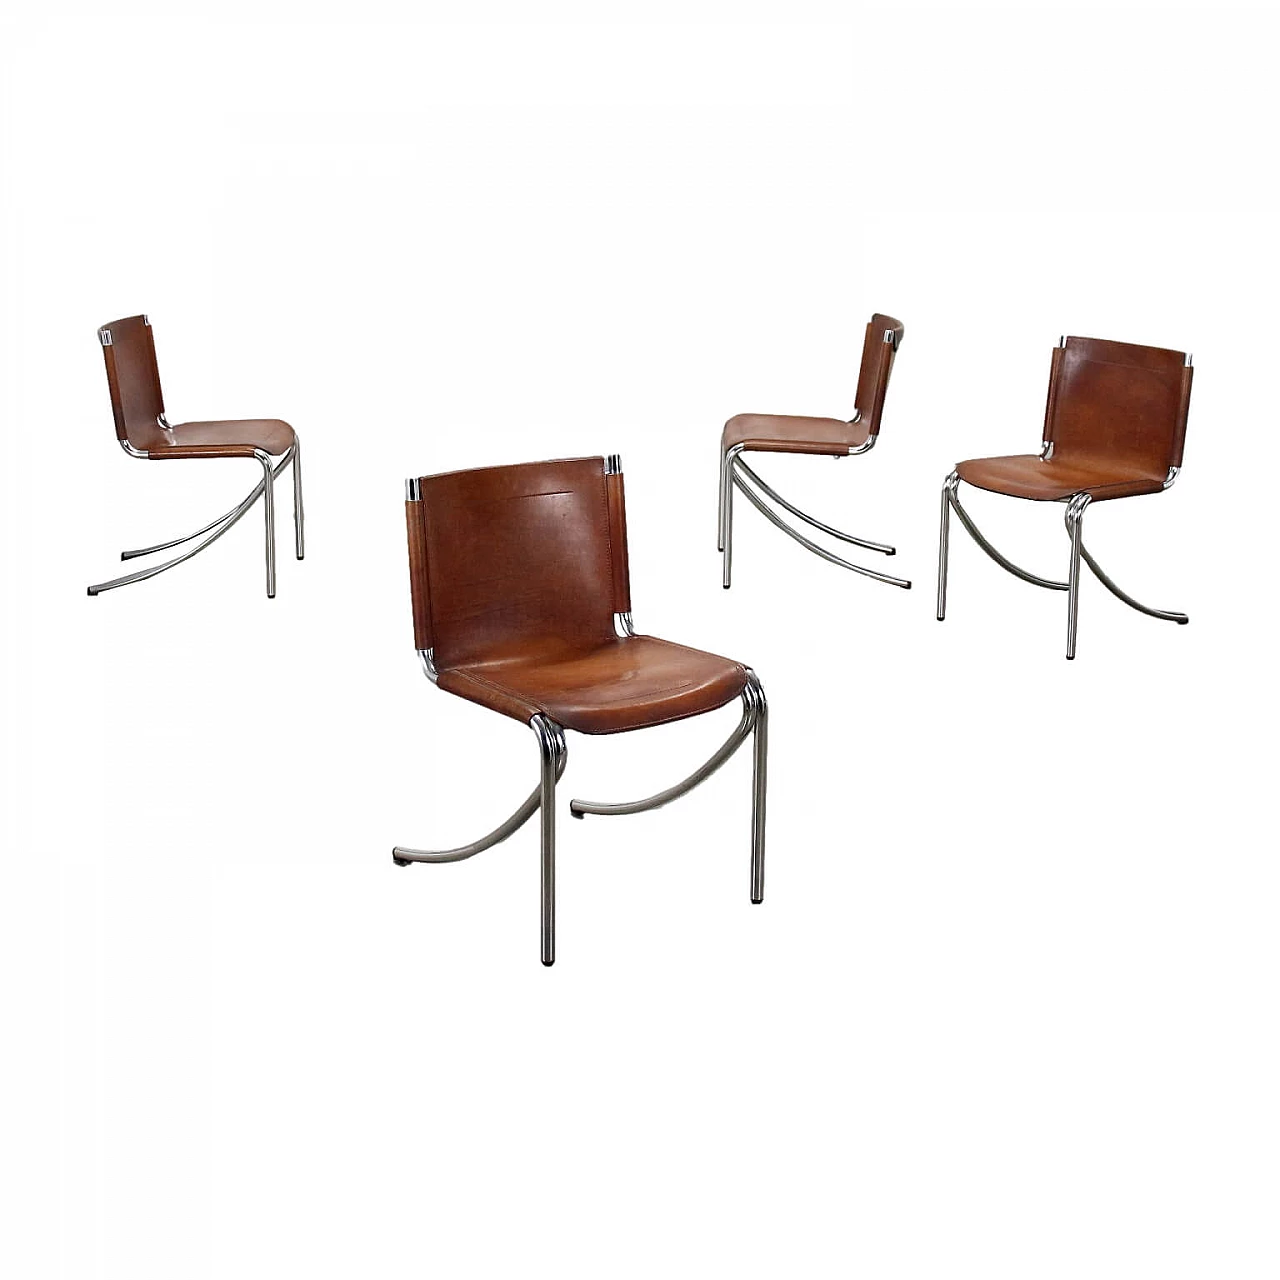 4 Jot chairs by Giotto Stoppino for Acerbis, 1970s 1446135